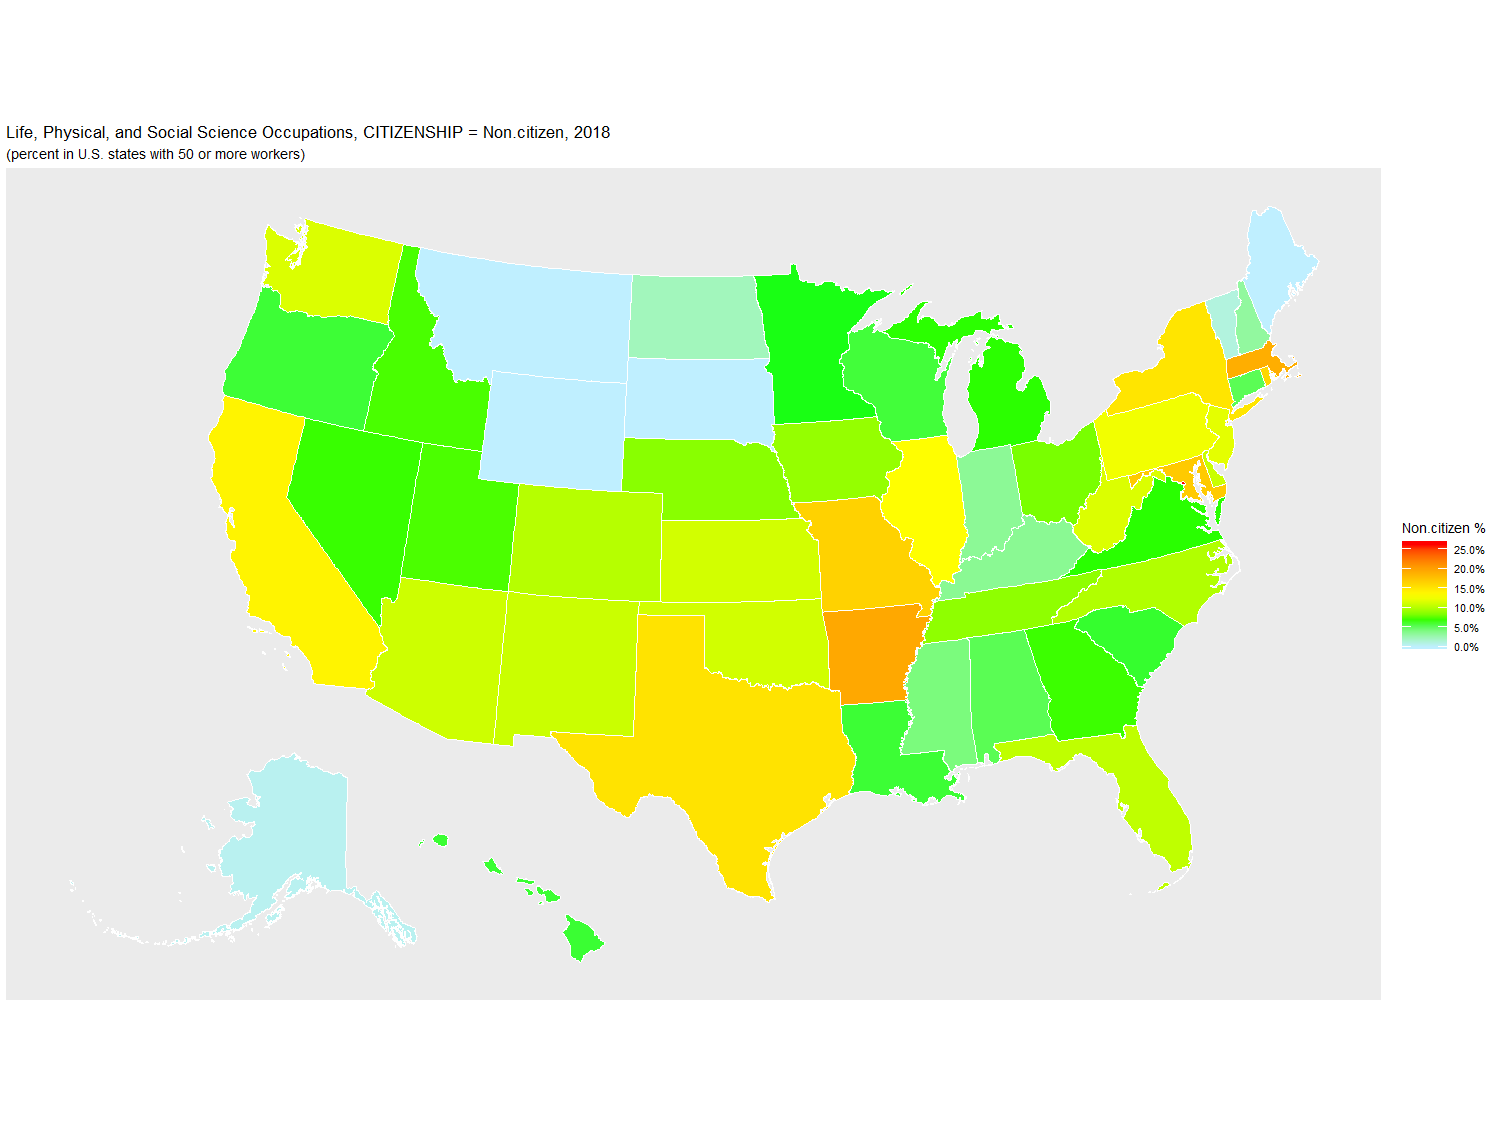 Non-citizen Percentage of Life, Physical, and Social Science Occupations by U.S. State, 2018